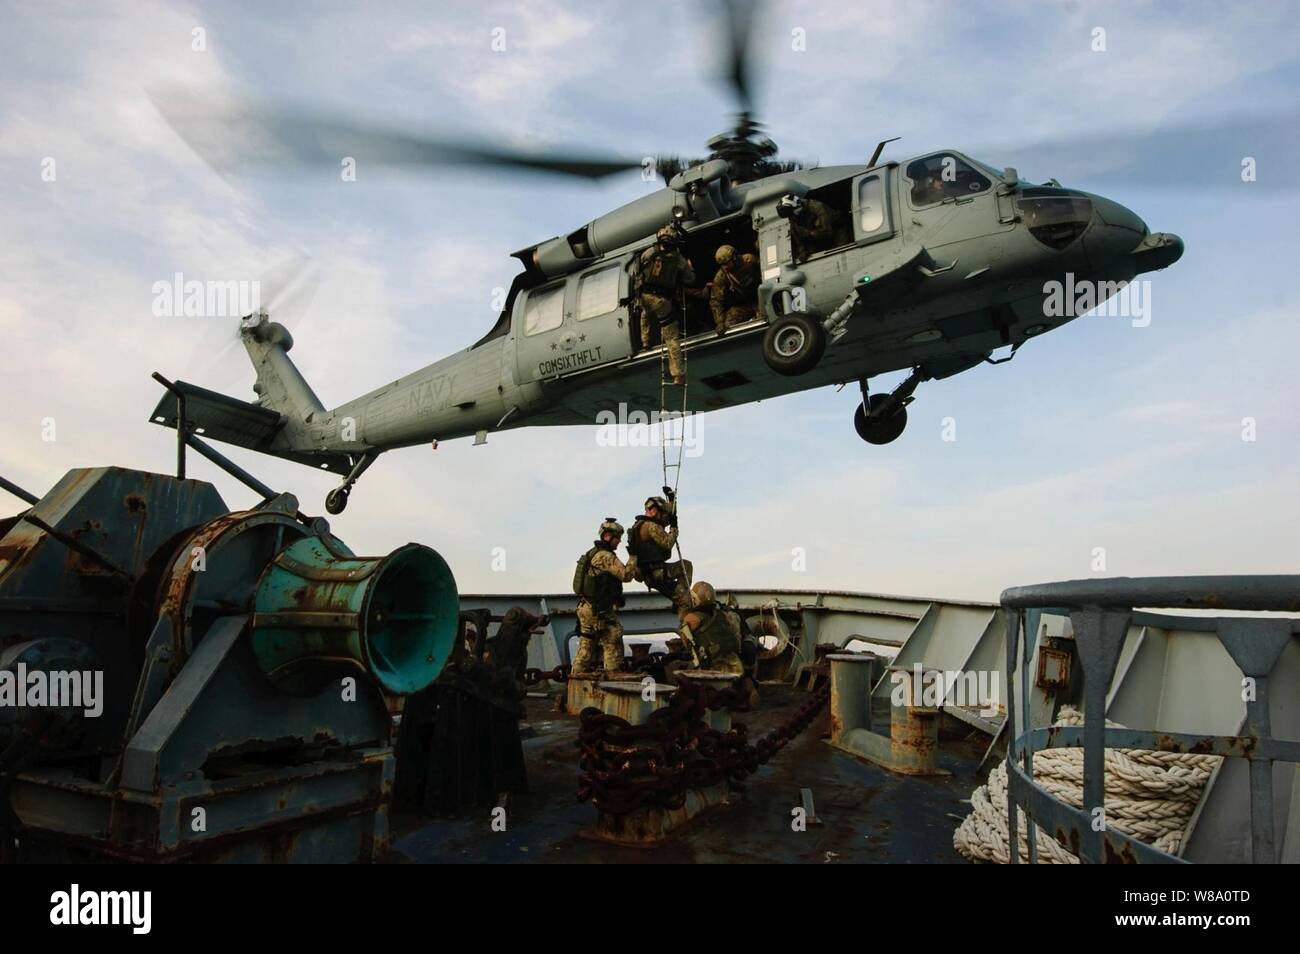 A U.S. Navy MH-60S Seahawk helicopter attached to Helicopter Sea Combat Squadron 28 conducts a shipboard extraction from an Italian Navy training vessel in the Gulf of La Spezia on March 13, 2012. Stock Photo